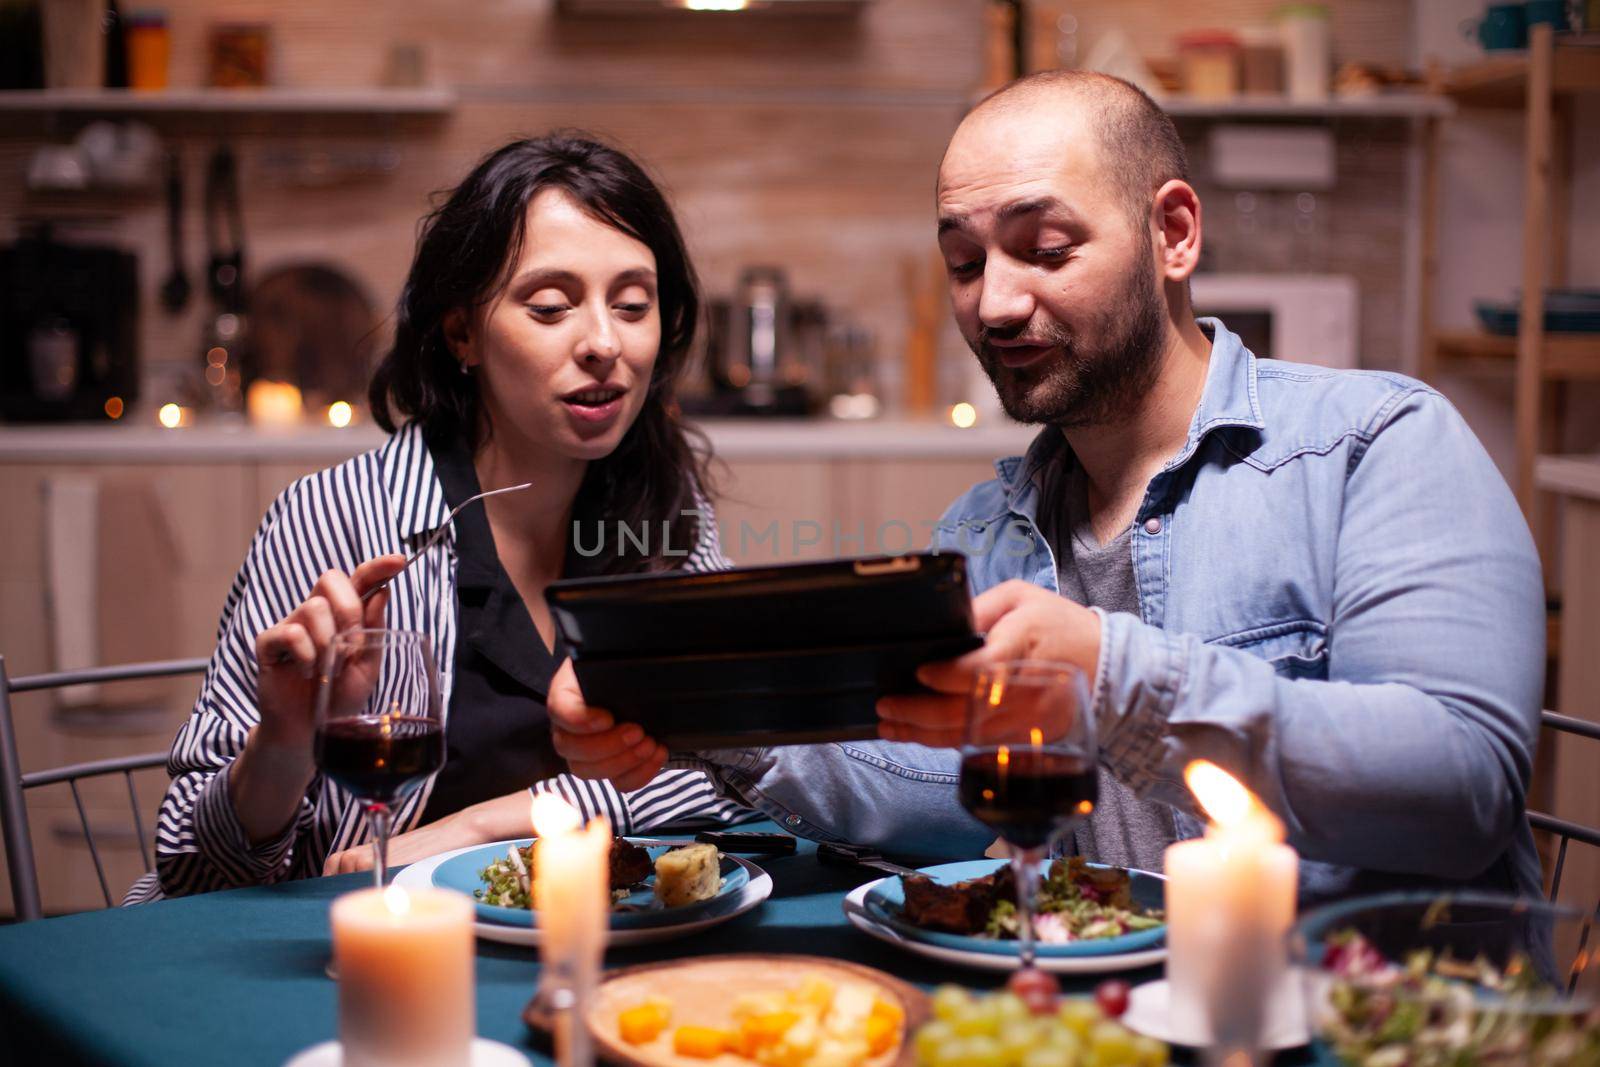 Cheerful young couple dining together using tablet during romantic dinner. Adults sitting at the table in the kitchen browsing, searching, , internet, celebrating, anniversary, happy., festive, enjoy.